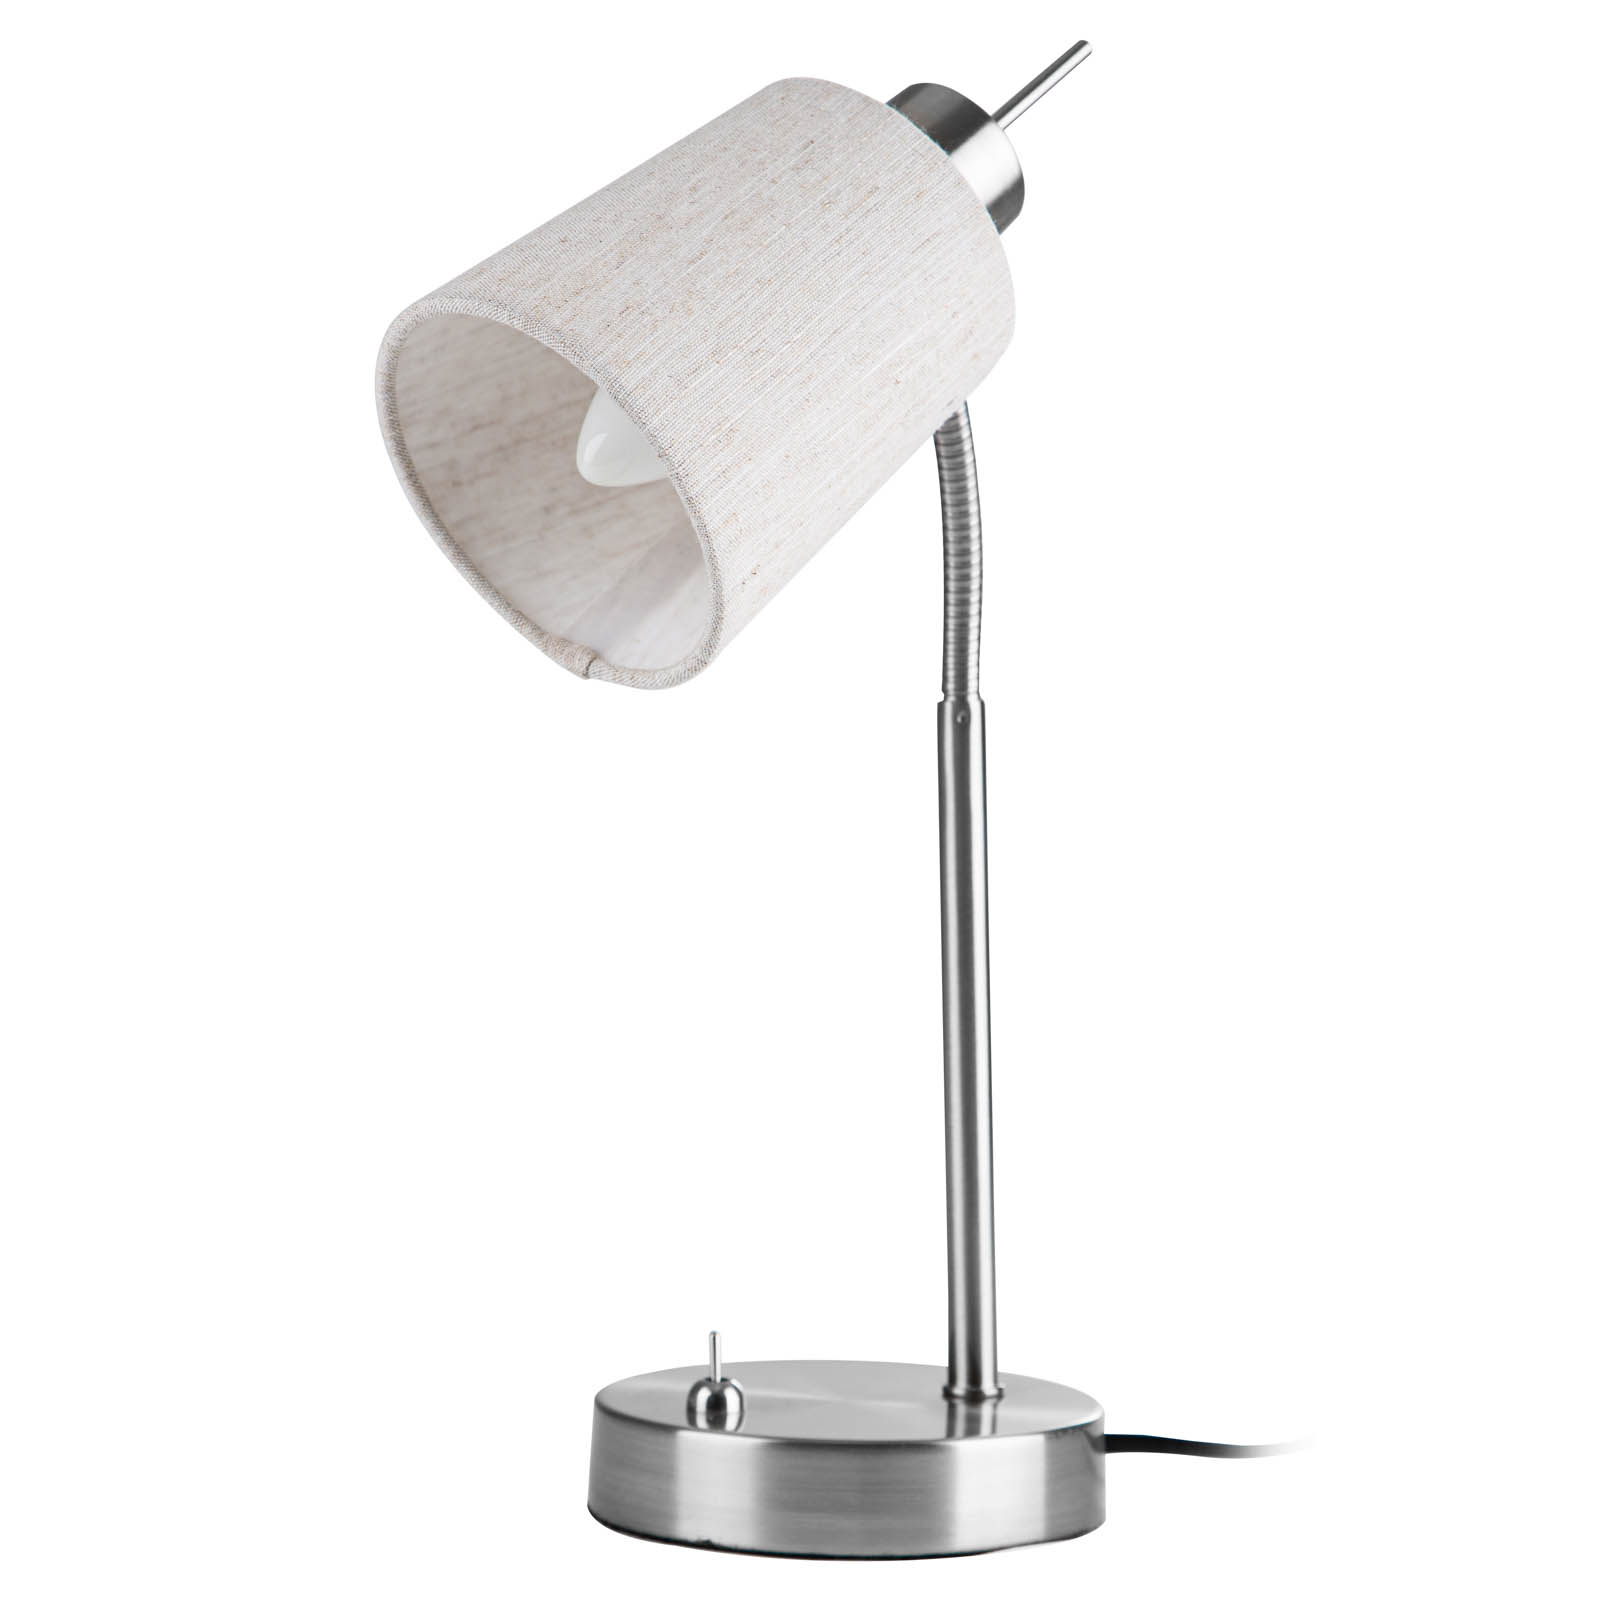 Lee table lamp with flex arm